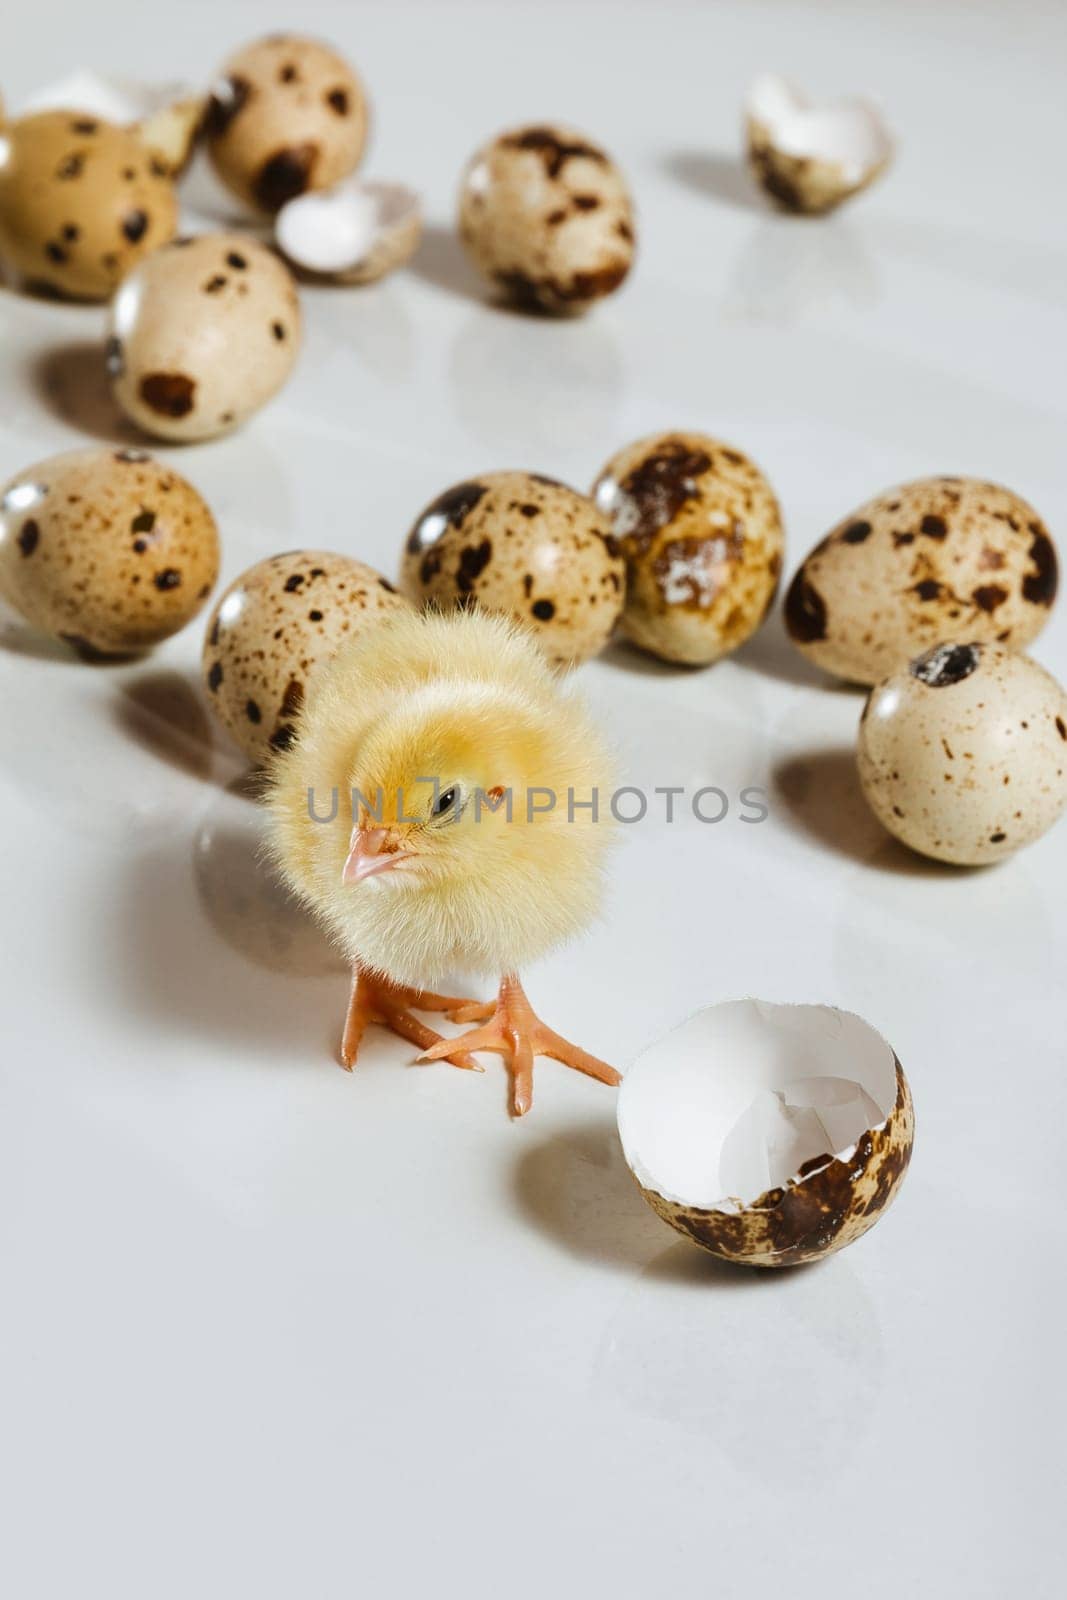 A quail chicken squints among the quail eggs. Poultry farming in incubators by ElenaNEL